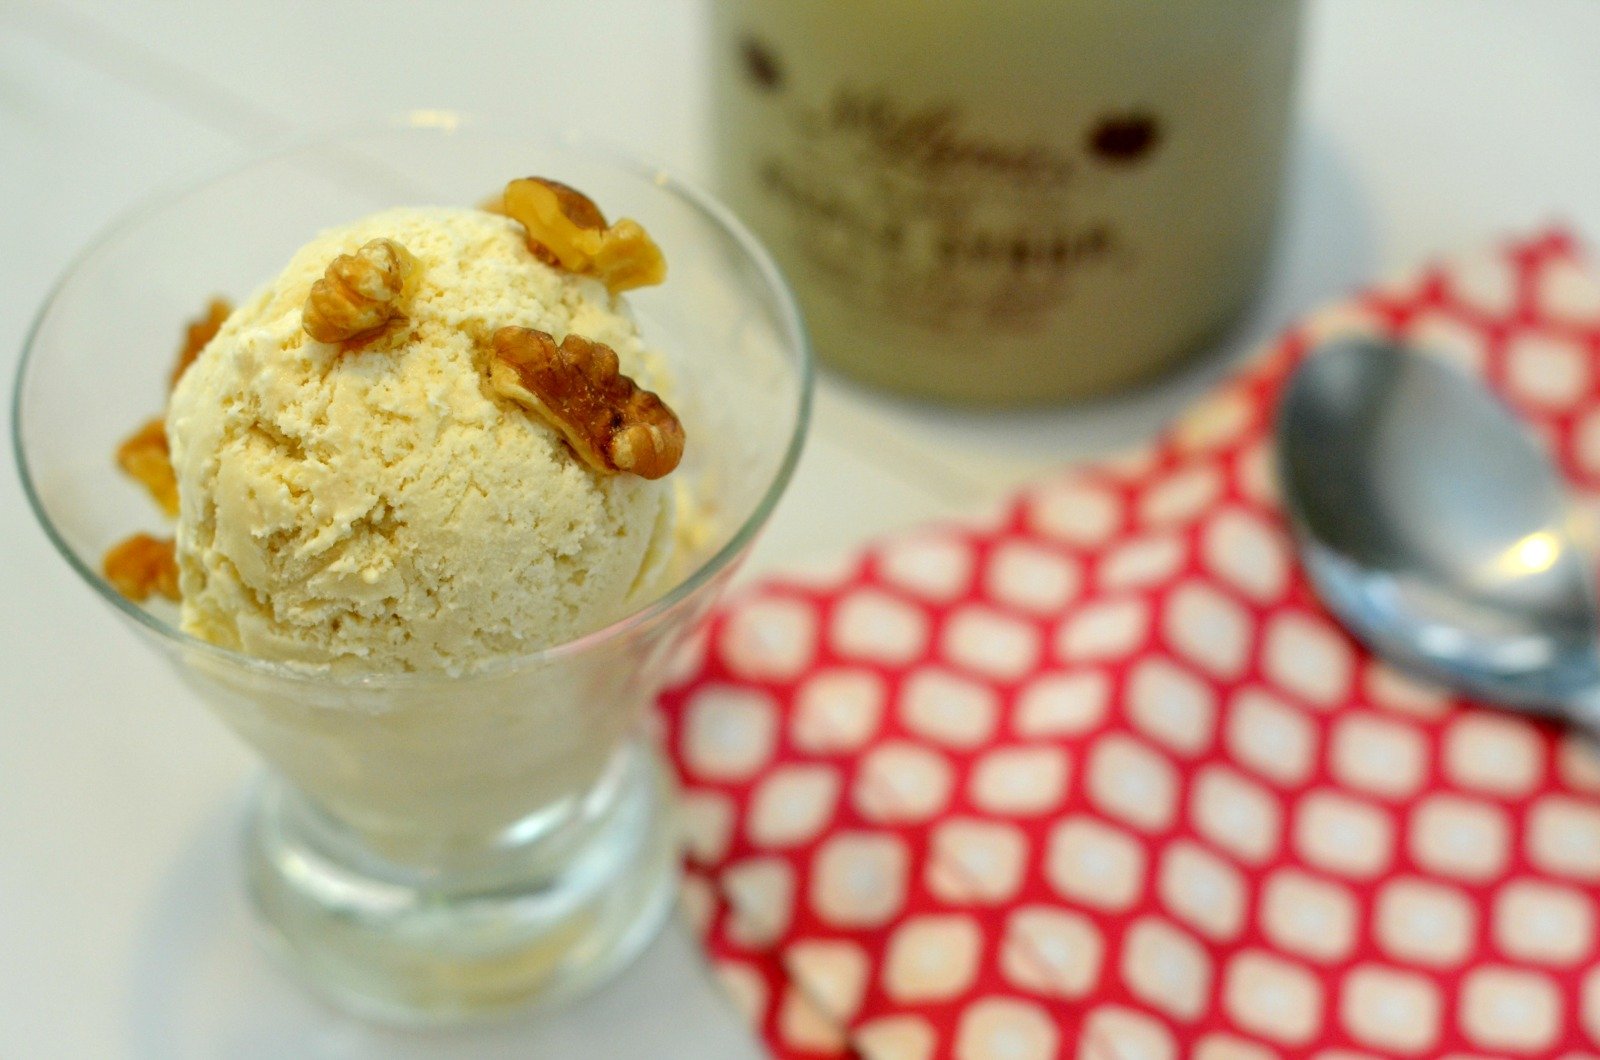 Maple Ice Cream made with heavy cream, milk, maple syrup and salt. Such a simple recipe for such a flavorful dessert. | www.thesurferskitchen.com